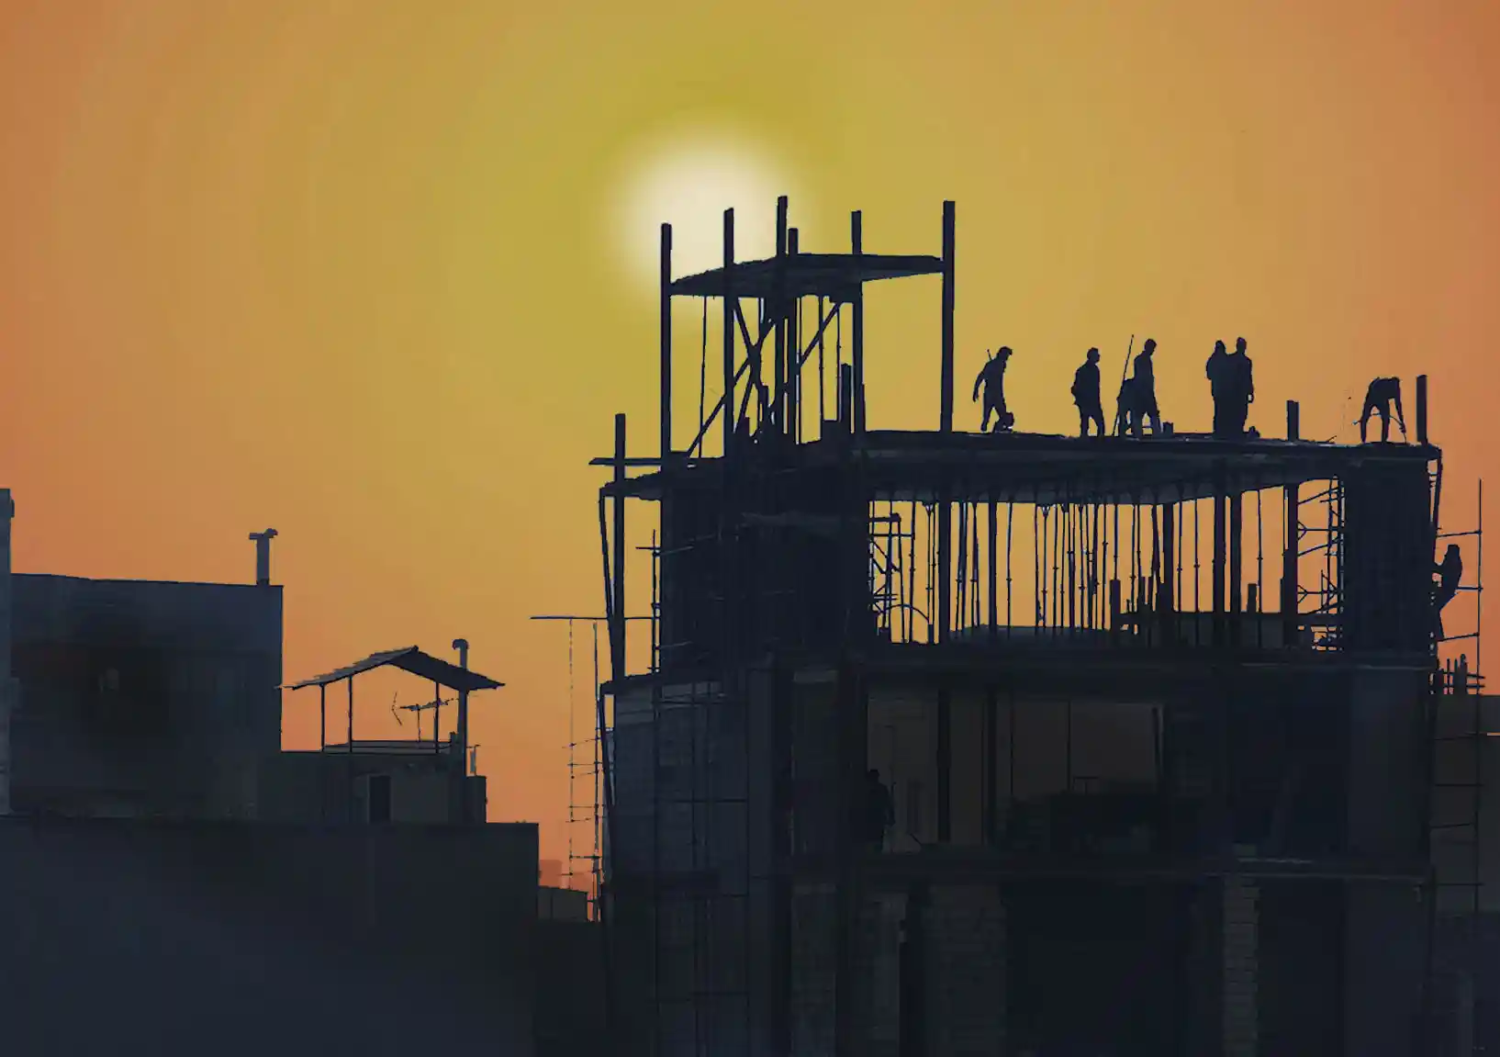 Construction workers work hard on a building site as the sun hovers over.